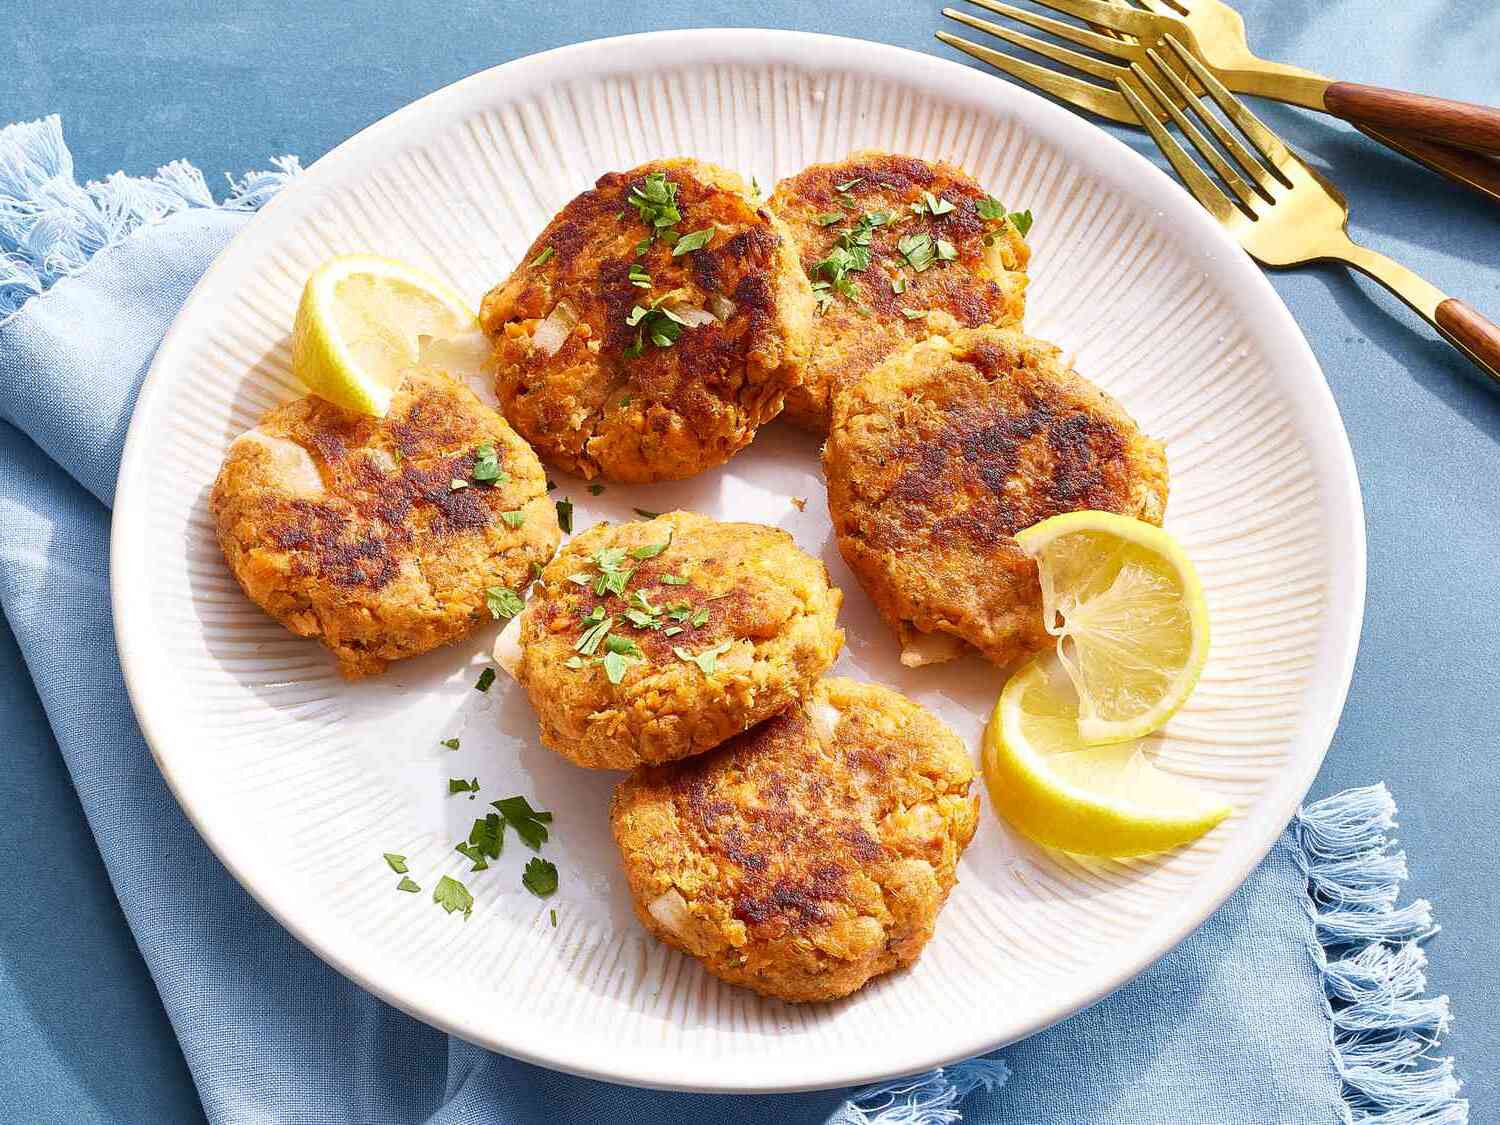 How to Make Instant Pot Salmon Cakes